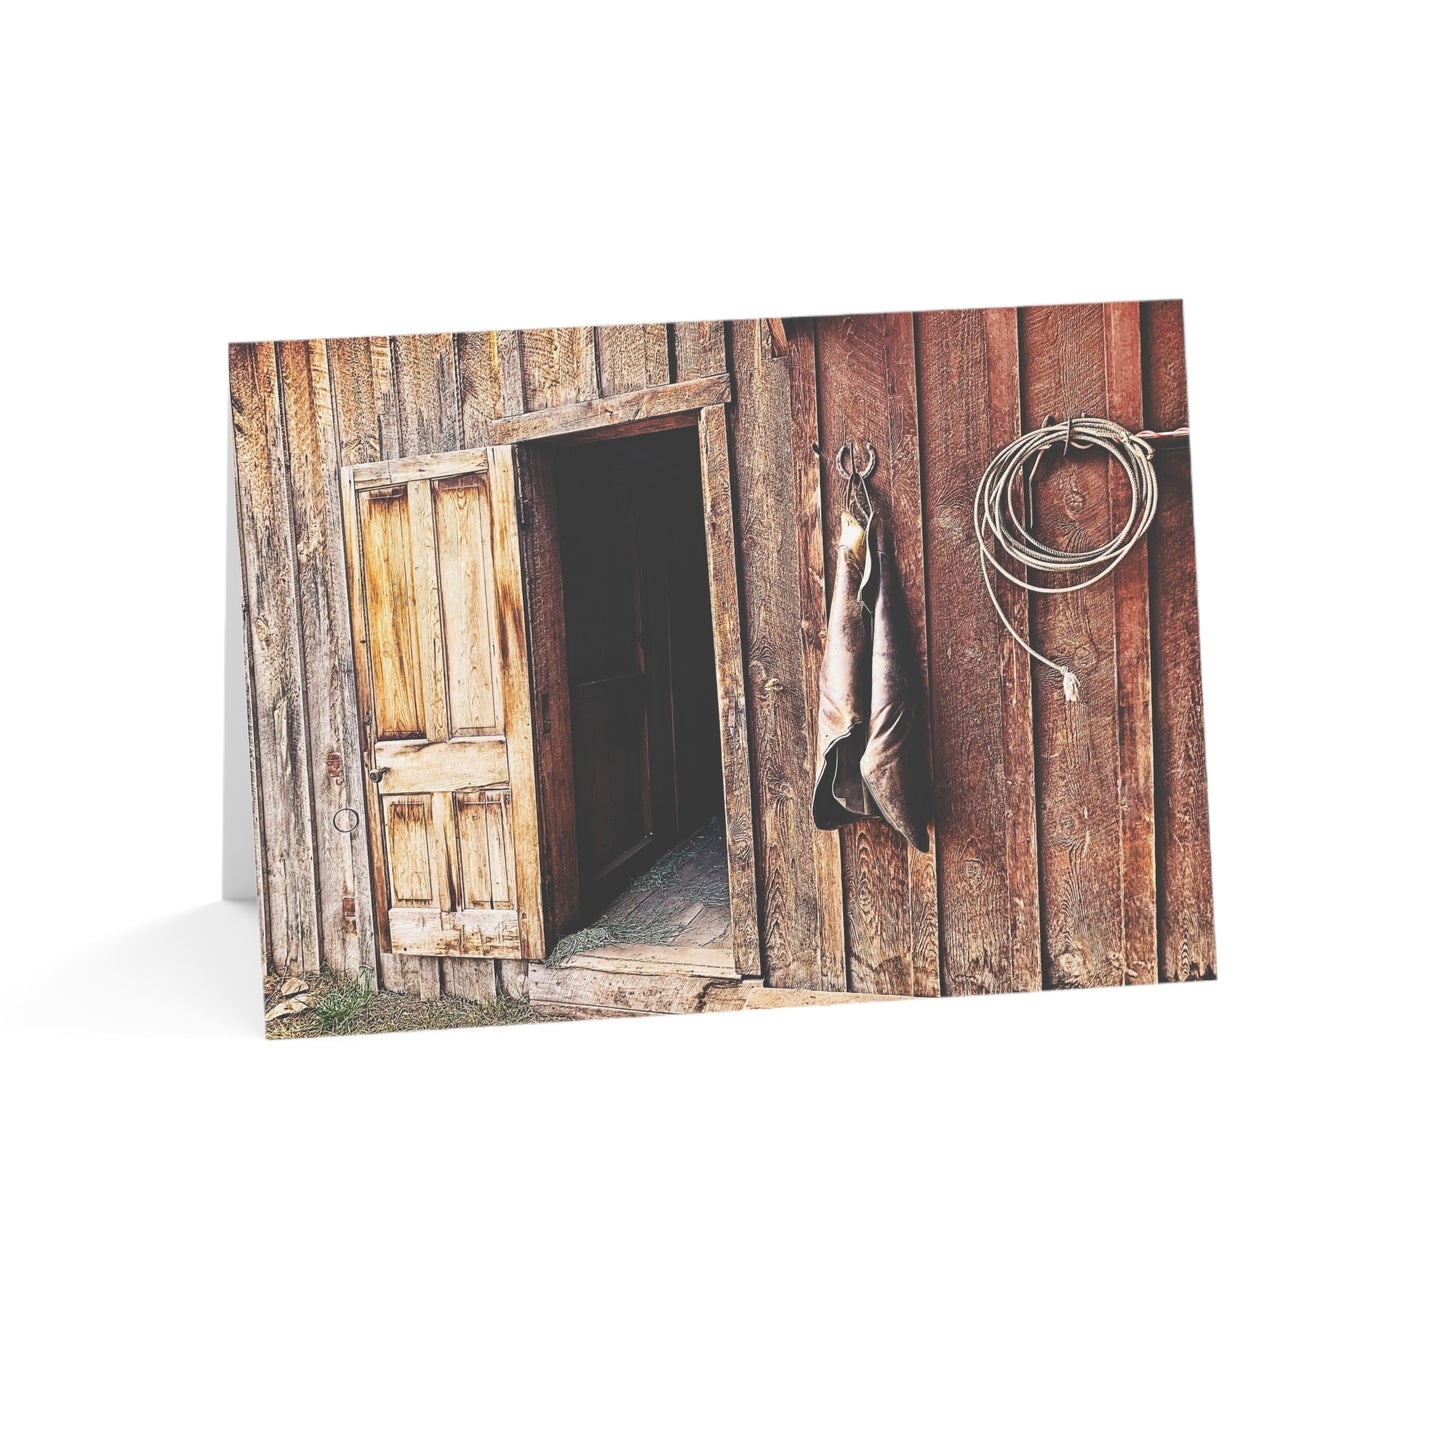 County Greeting Cards Rustic Barn Note Card Thank You Card  (1, 10, 30, and 50pcs)